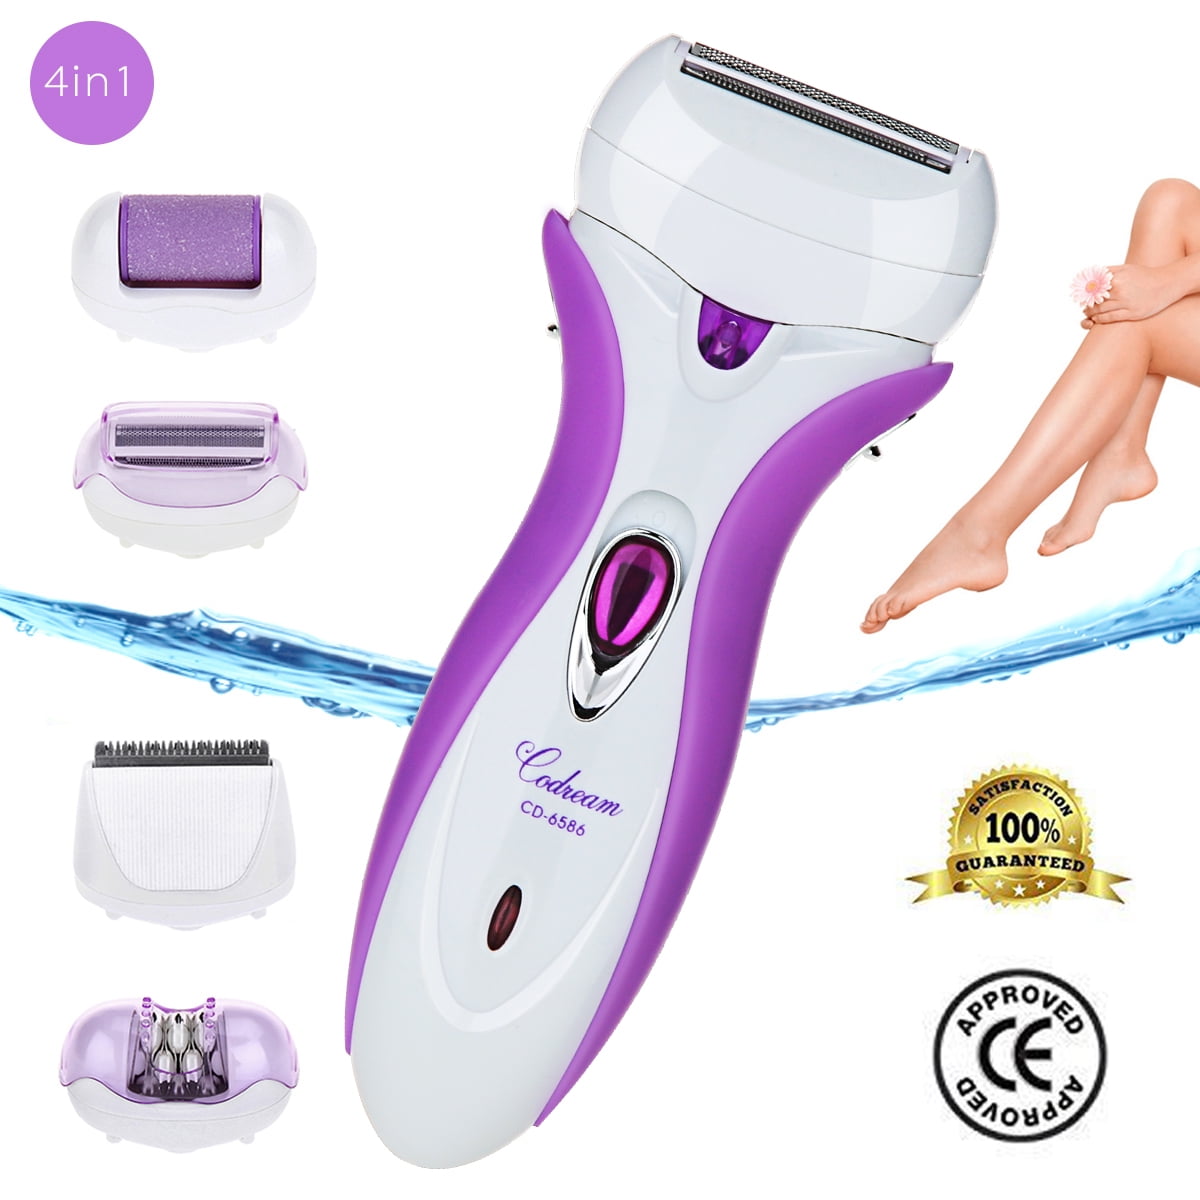 Finishing Touch Flawless Legs Women's Wet Dry Hair Removal USA FAST SHIPPING 